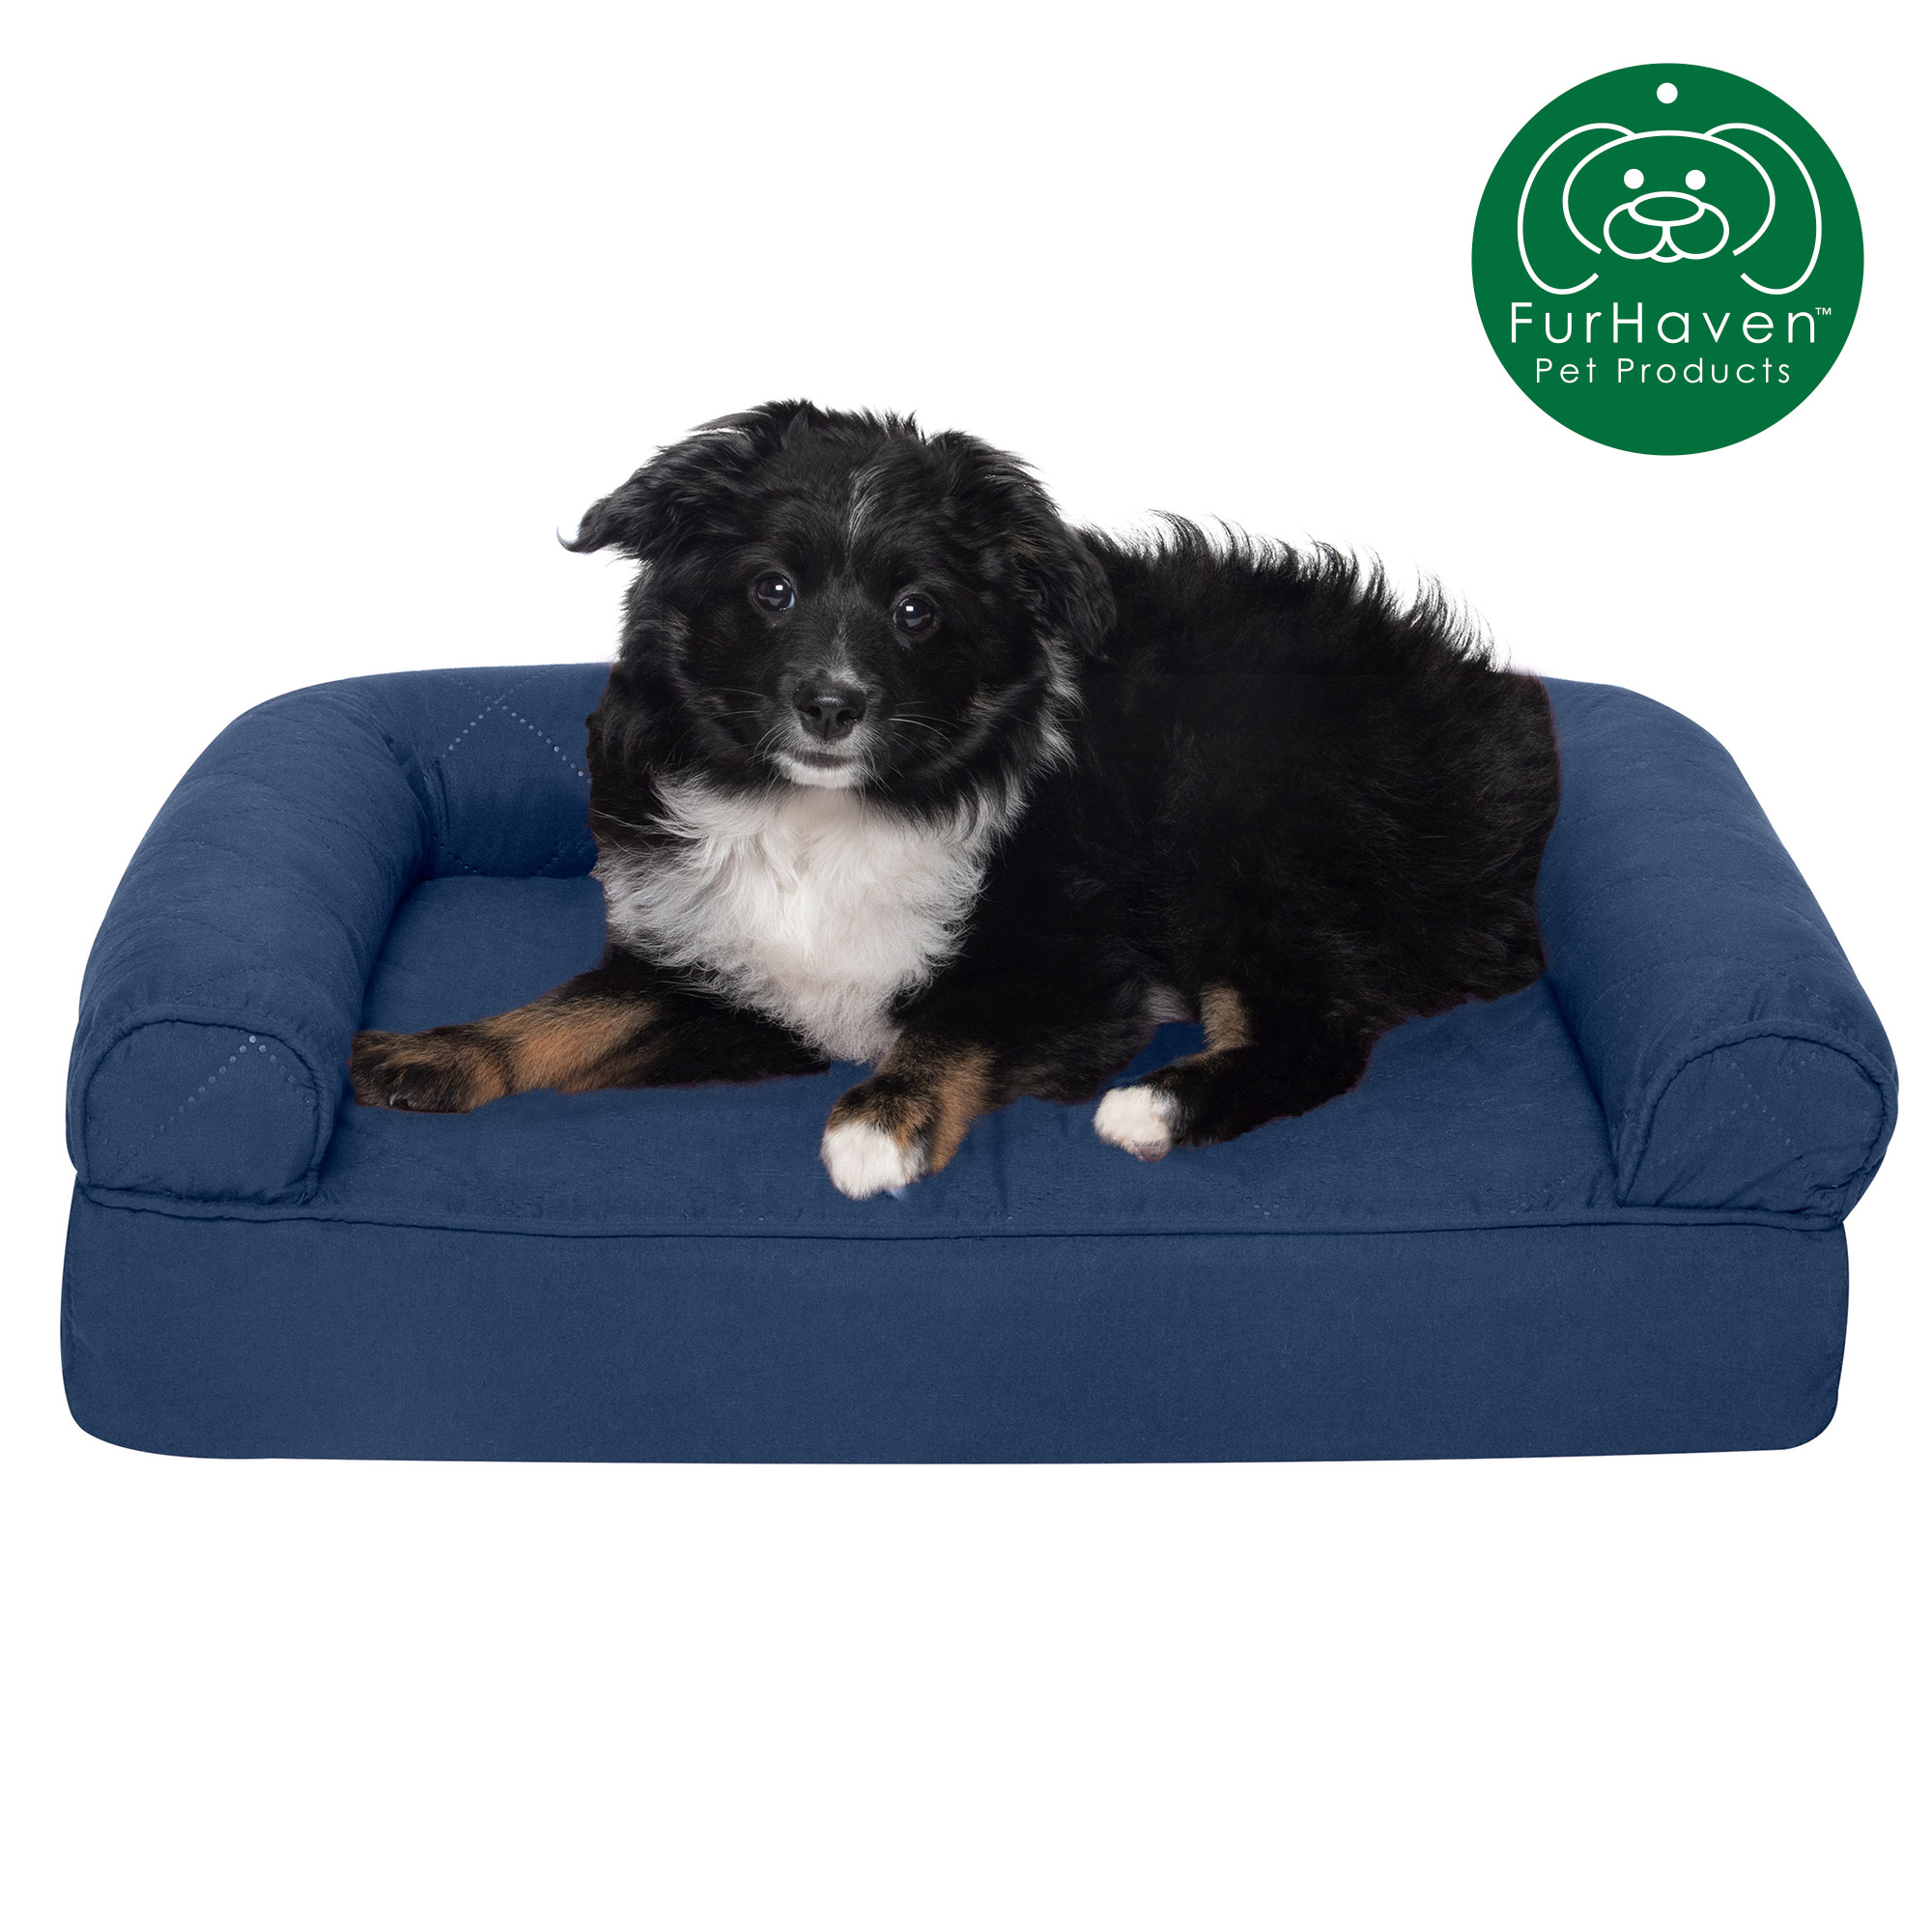 FurHaven | Orthopedic Quilted Sofa Pet Bed for Dogs & Cats, Navy, Small - image 1 of 13